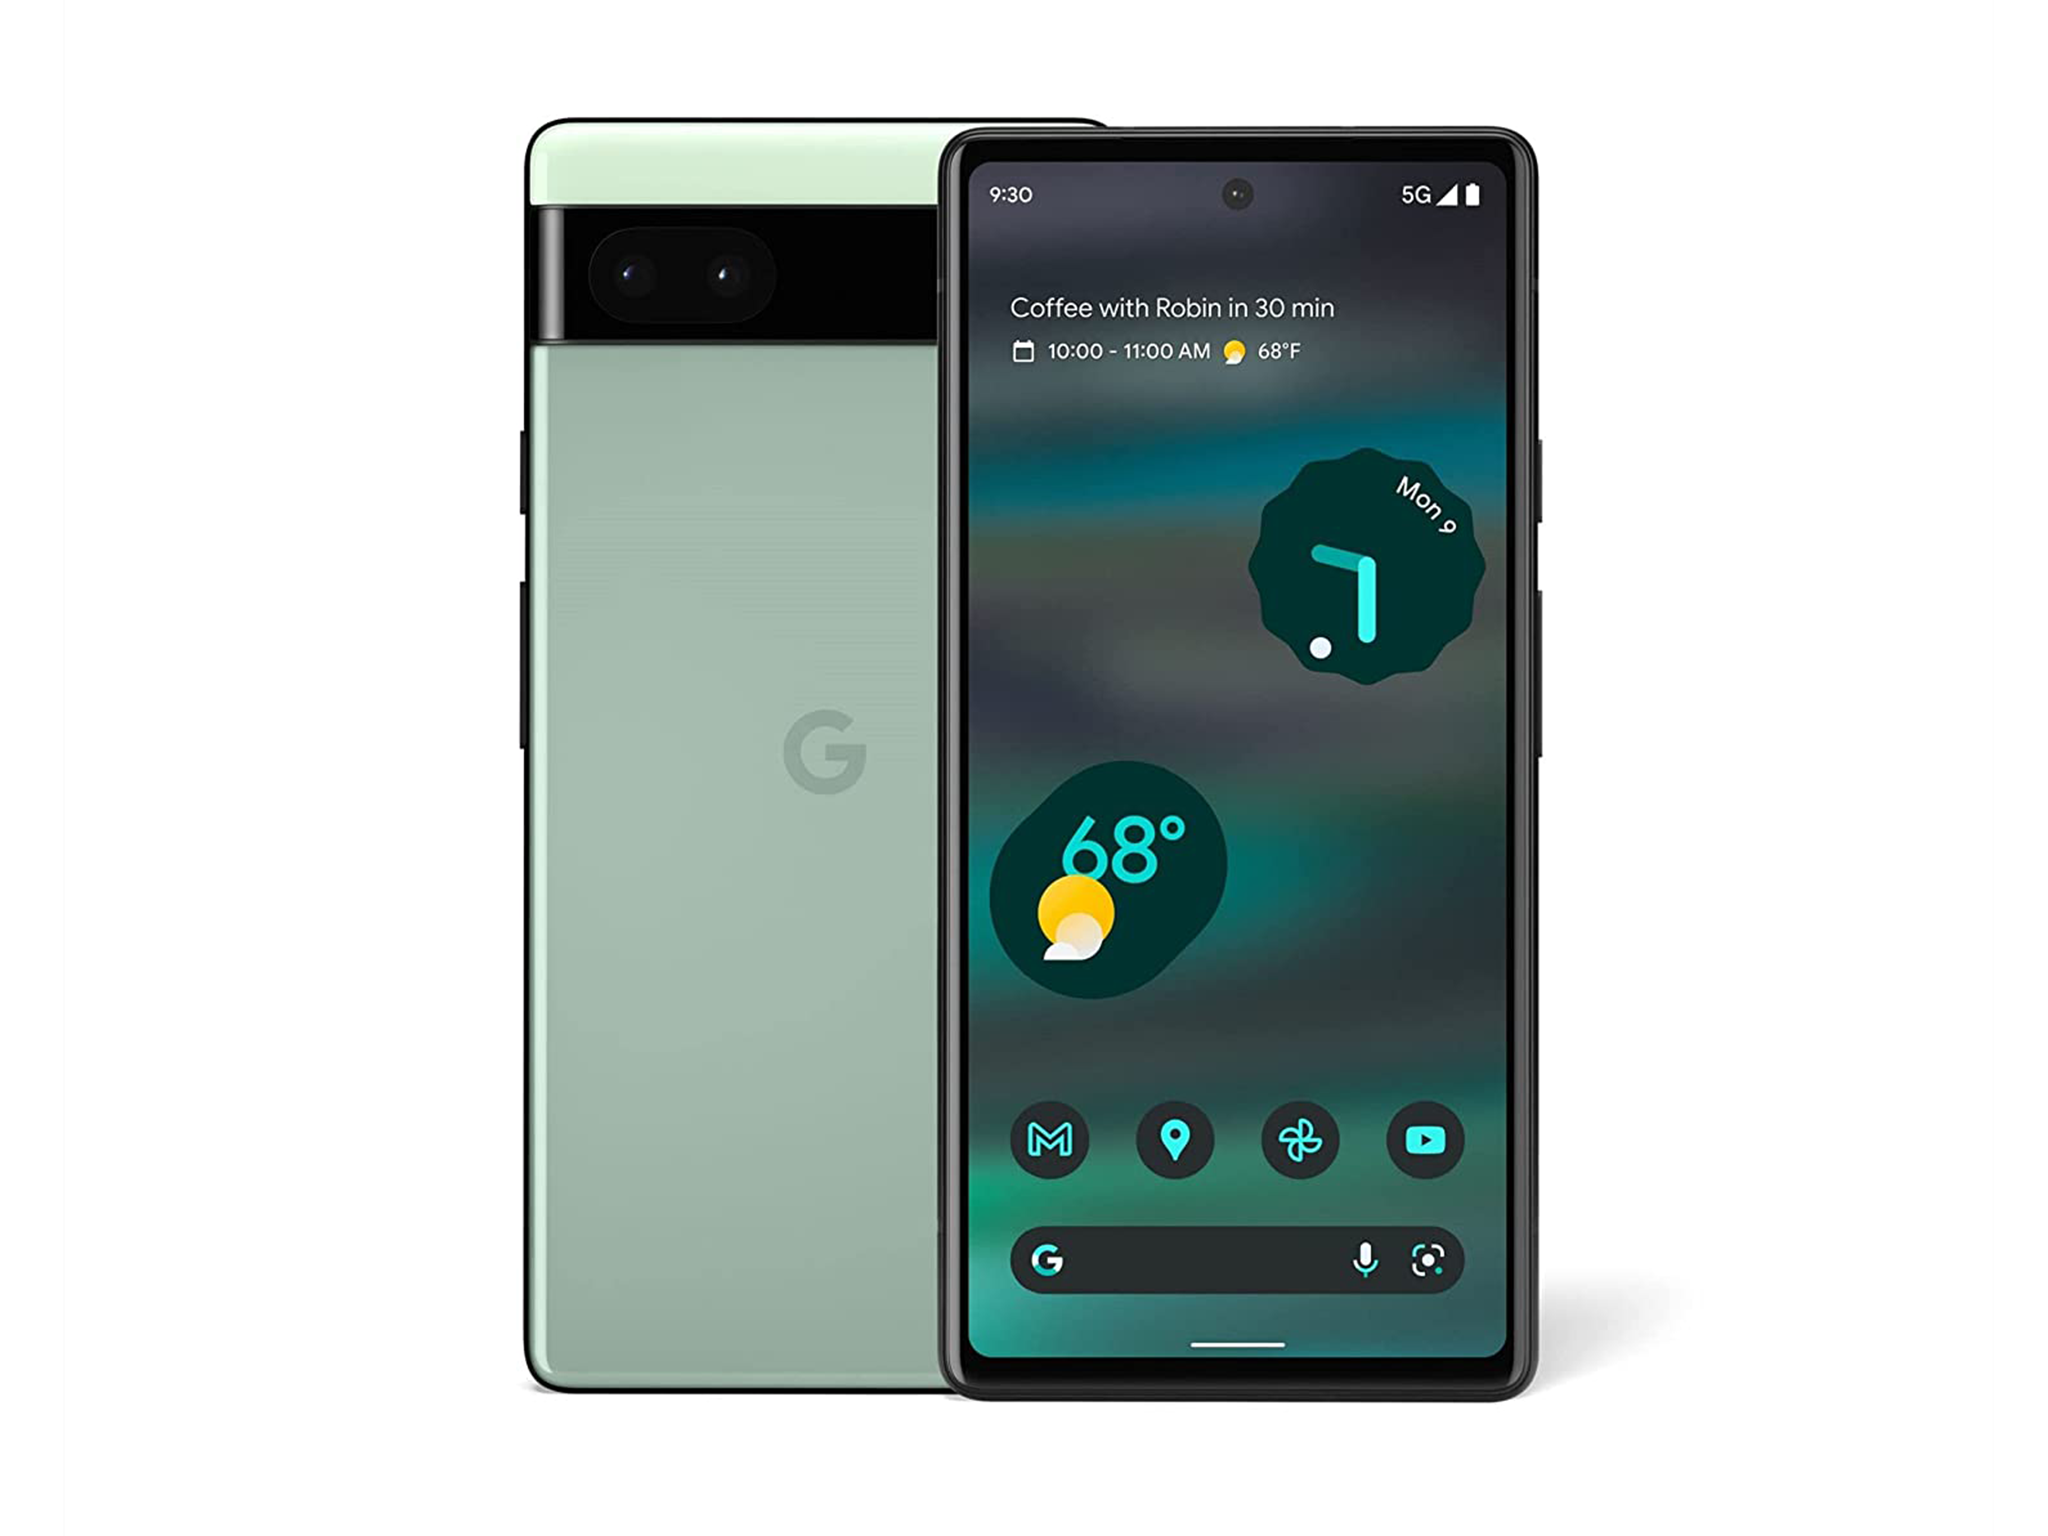 The Pixel 6a launched in 2022